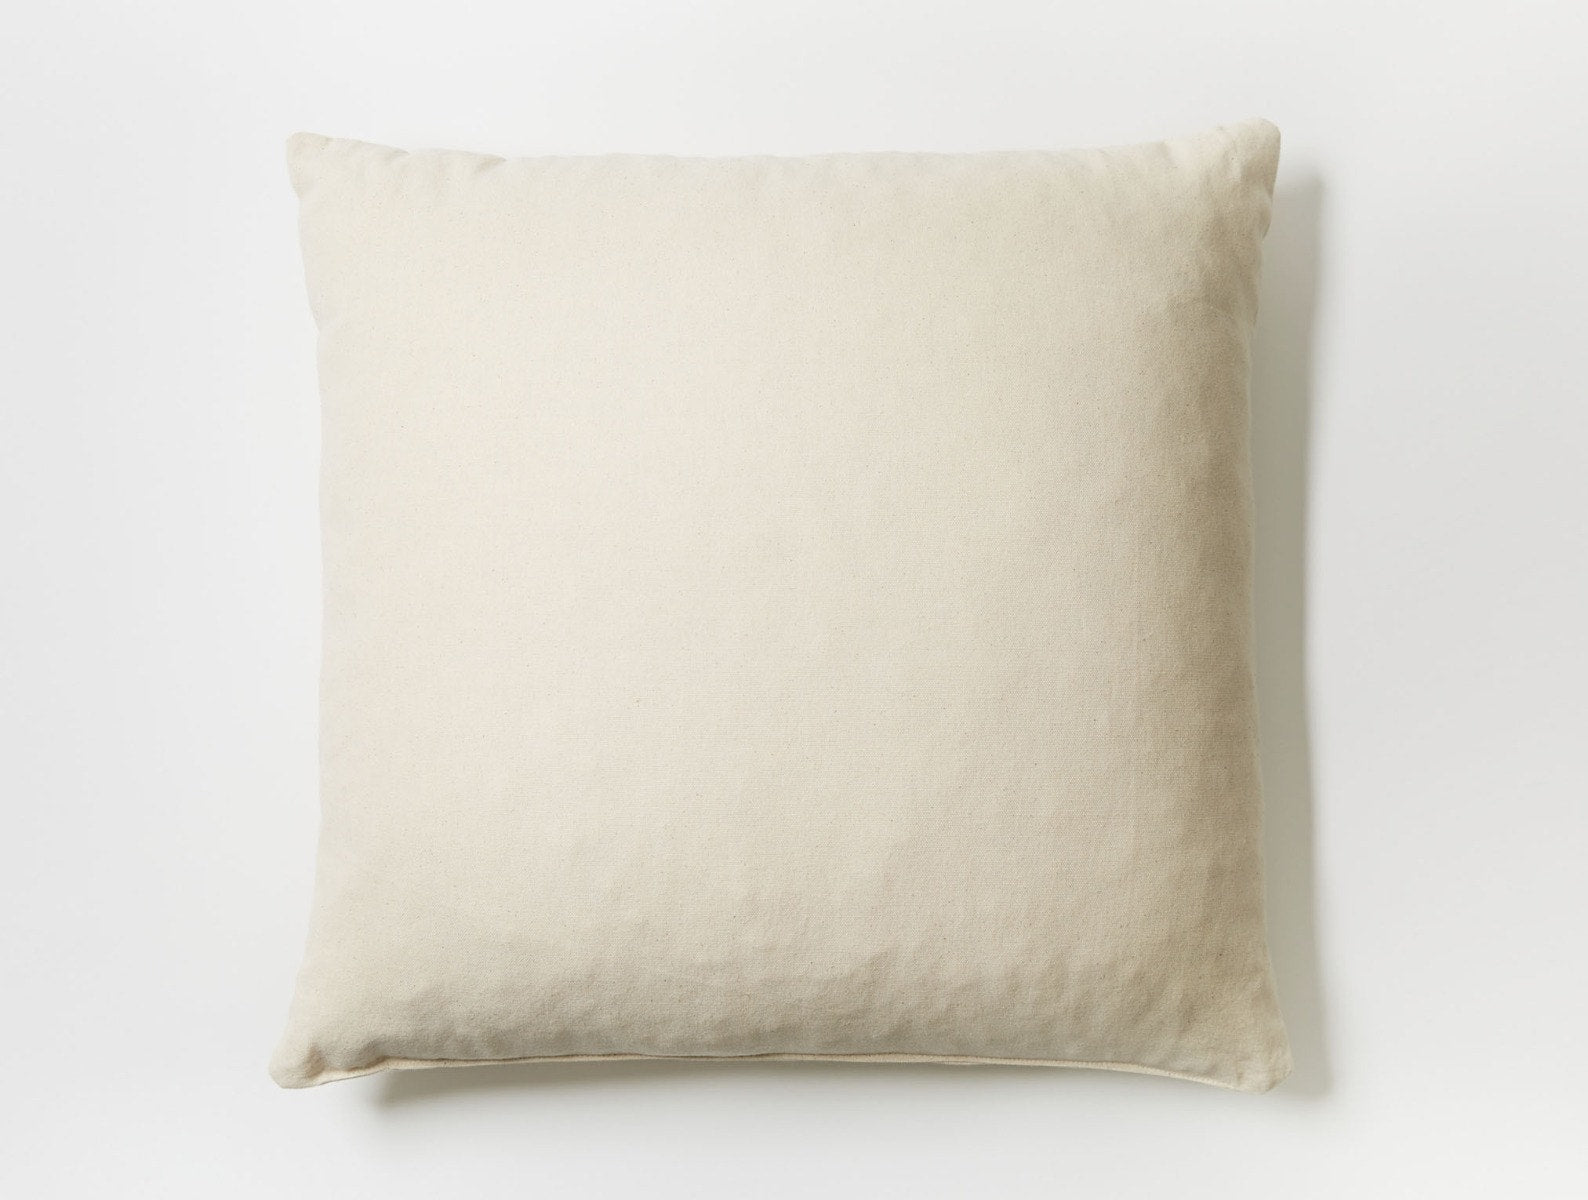 Decorative Throw Pillow Insert, Down And Feathers Filling, Cotton